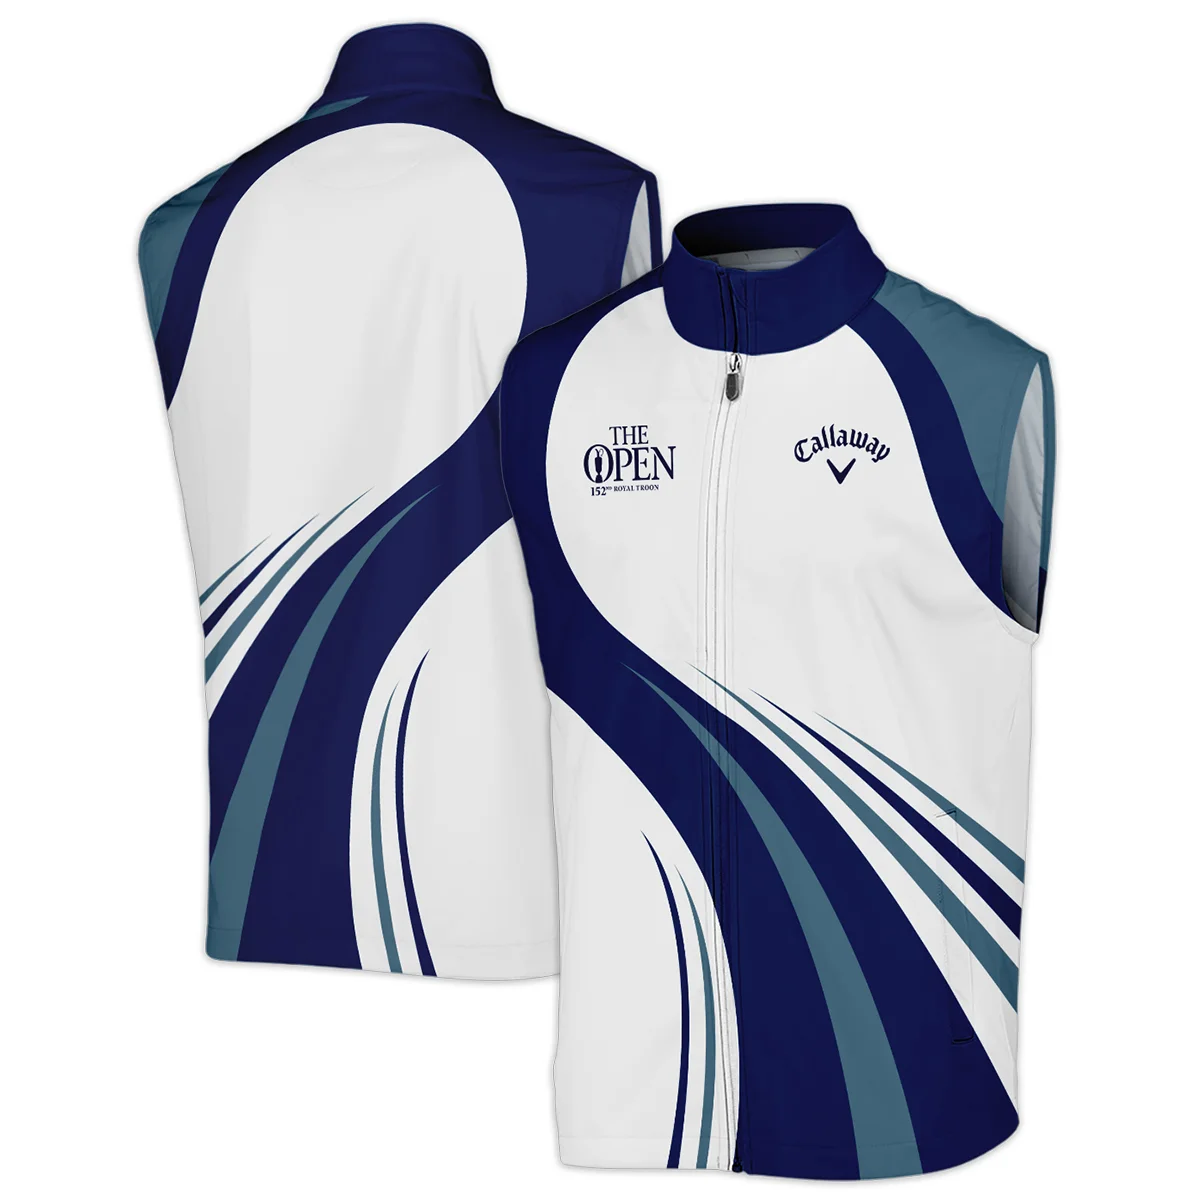 152nd Open Championship Callaway White Mostly Desaturated Dark Blue Sleeveless Jacket All Over Prints HOTOP270624A02CLWSJK